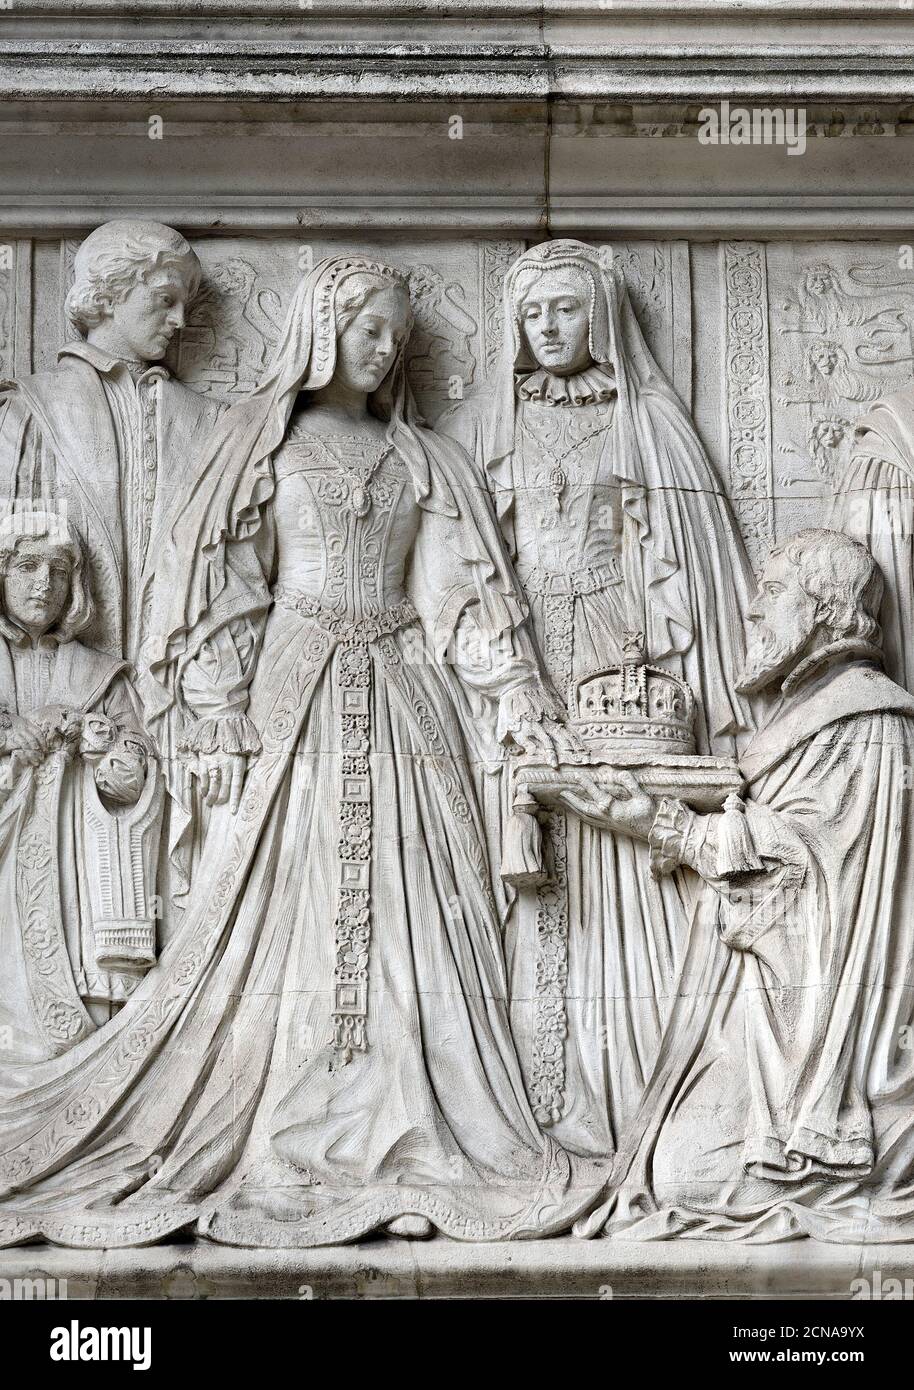 London, England, UK. Supreme Court / Middlesex Guildhall (1906) Parliament Square. Stone frieze on the facade (Henry Fehr): Lady Jane Grey accepting t Stock Photo